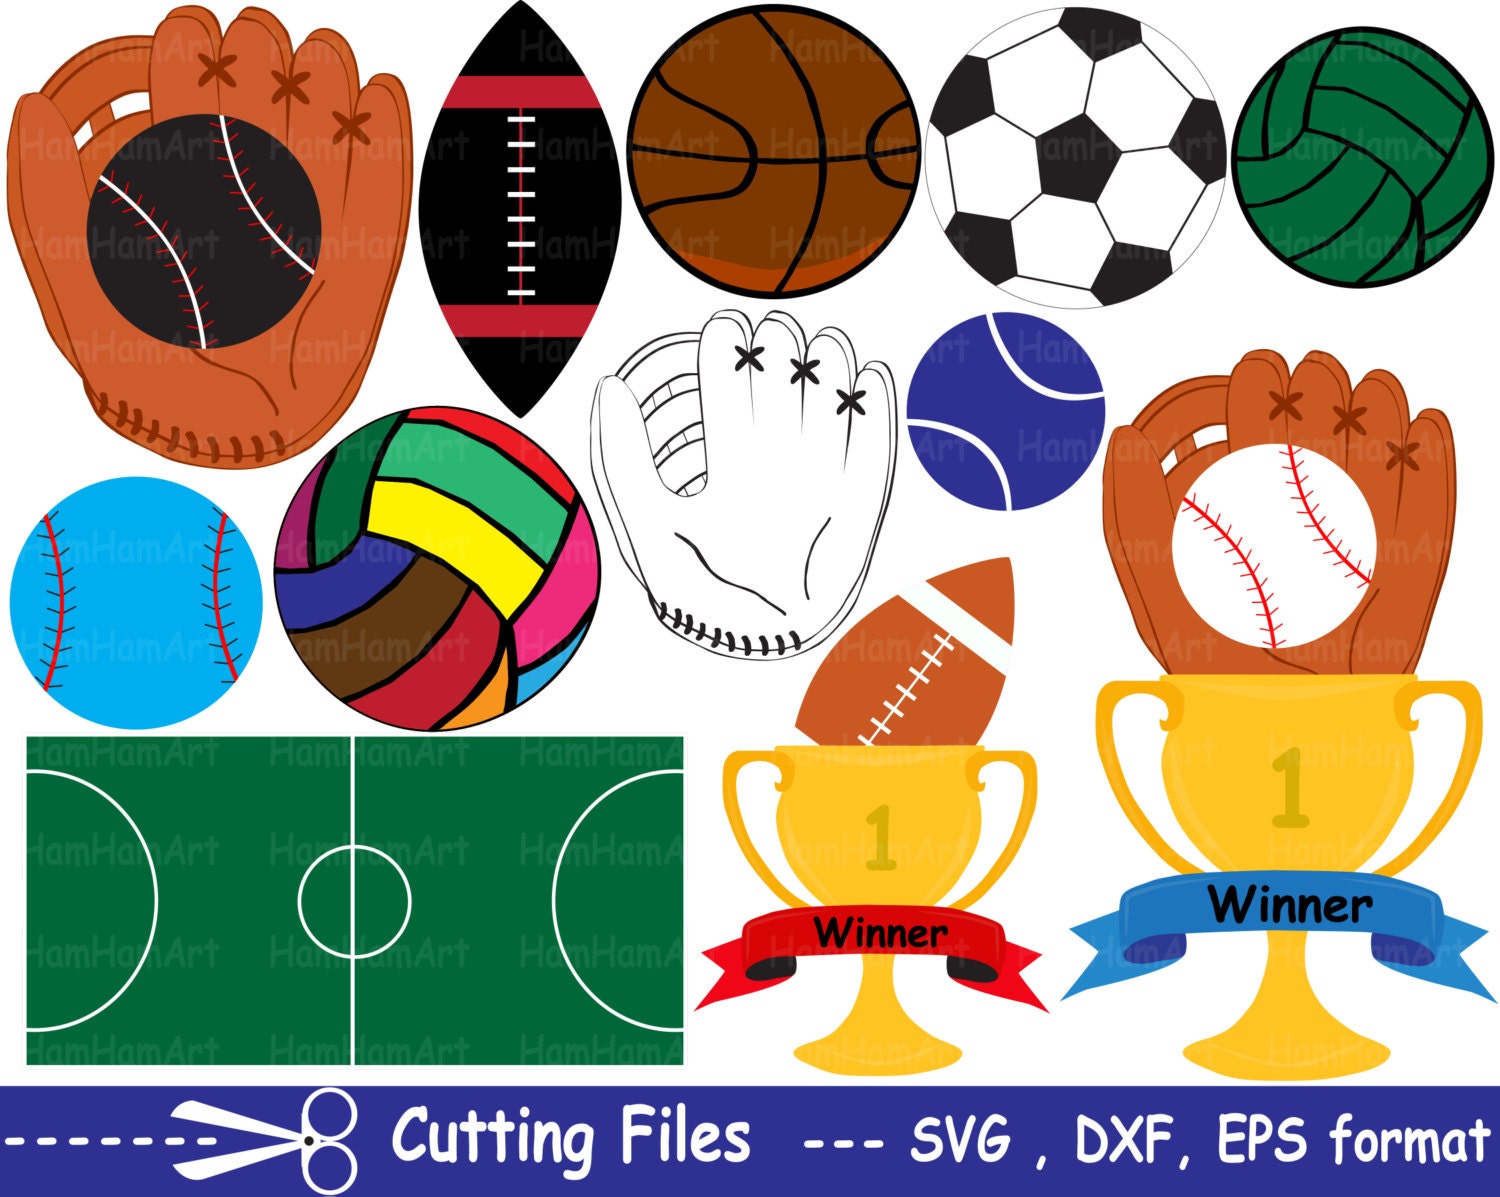 Download Cutting files SVG DXFEPSpng Sports items Vinyl cut